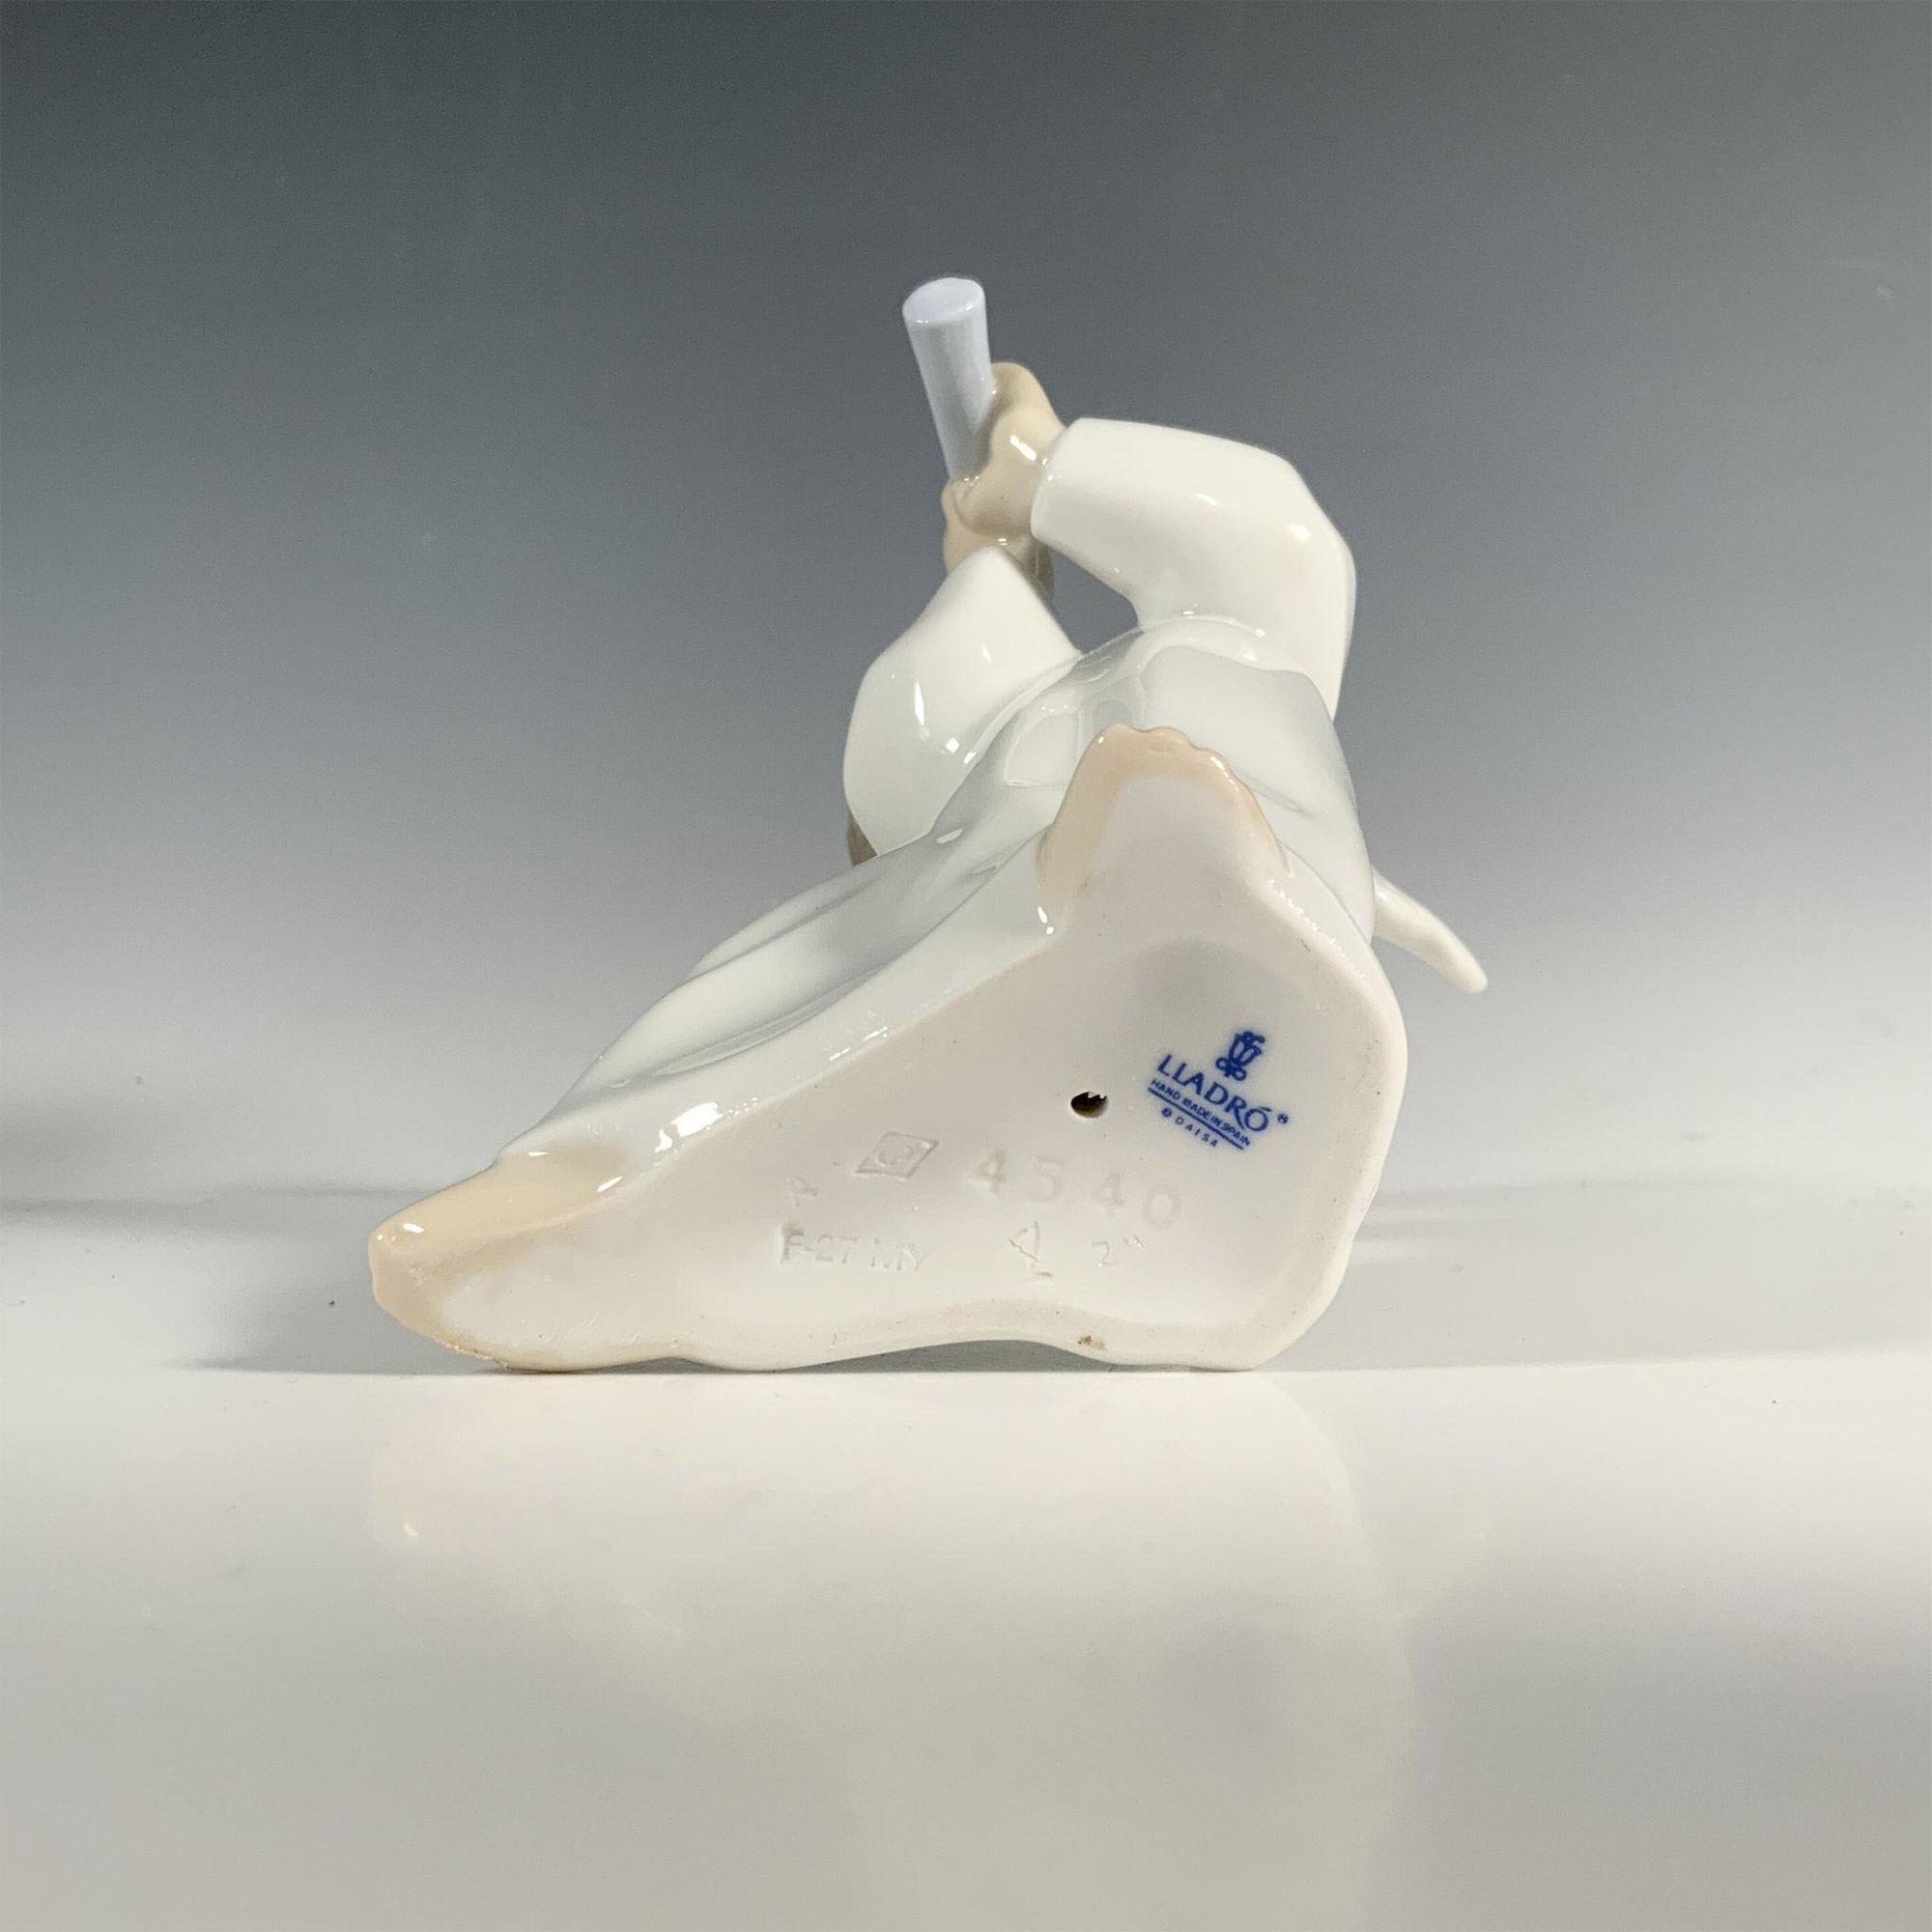 Angel With Flute 1004540 - Lladro Porcelain Figurine - Image 3 of 4